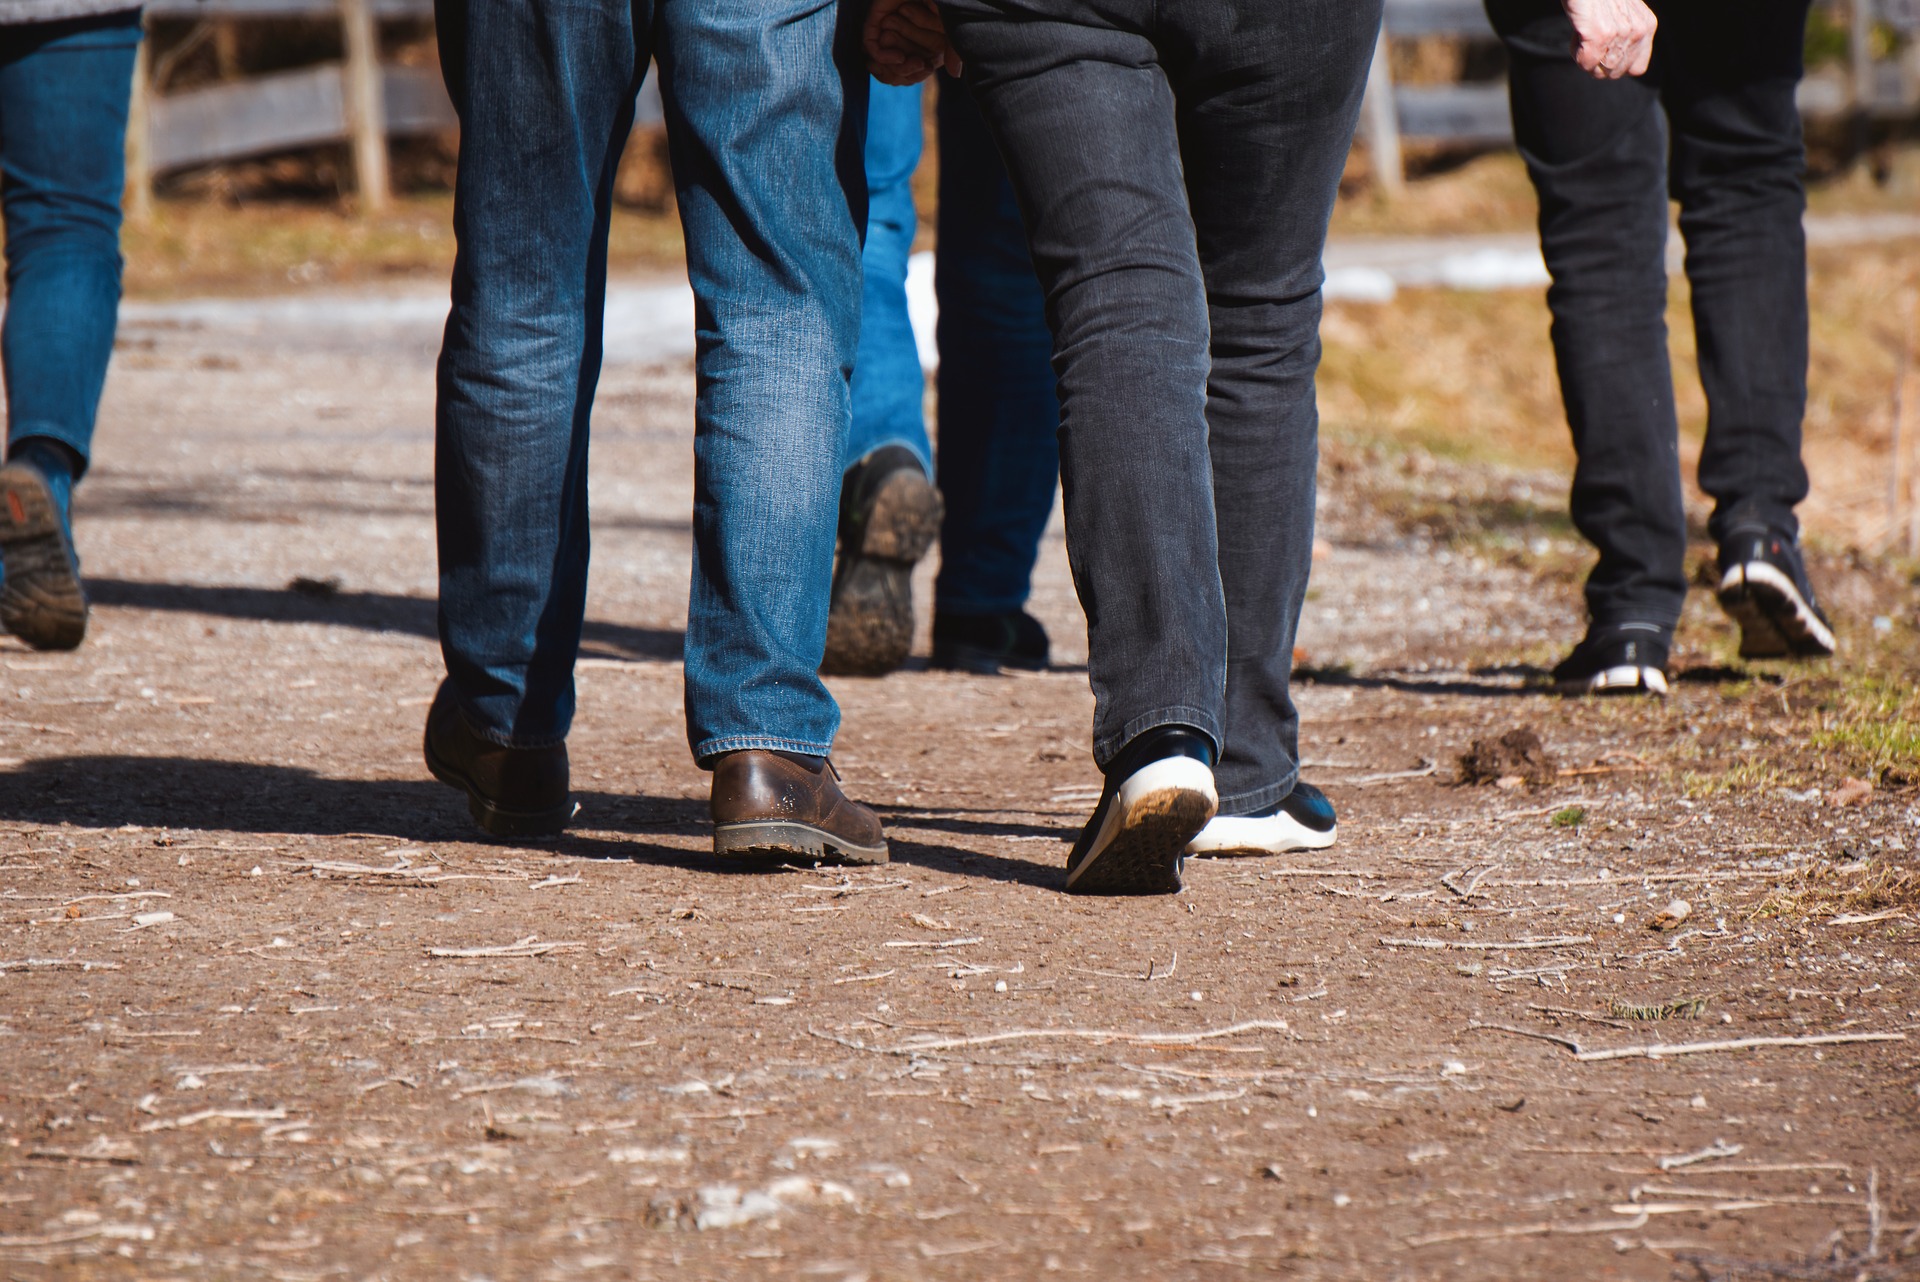 Picture of people walking showing only the lower legs and feet.